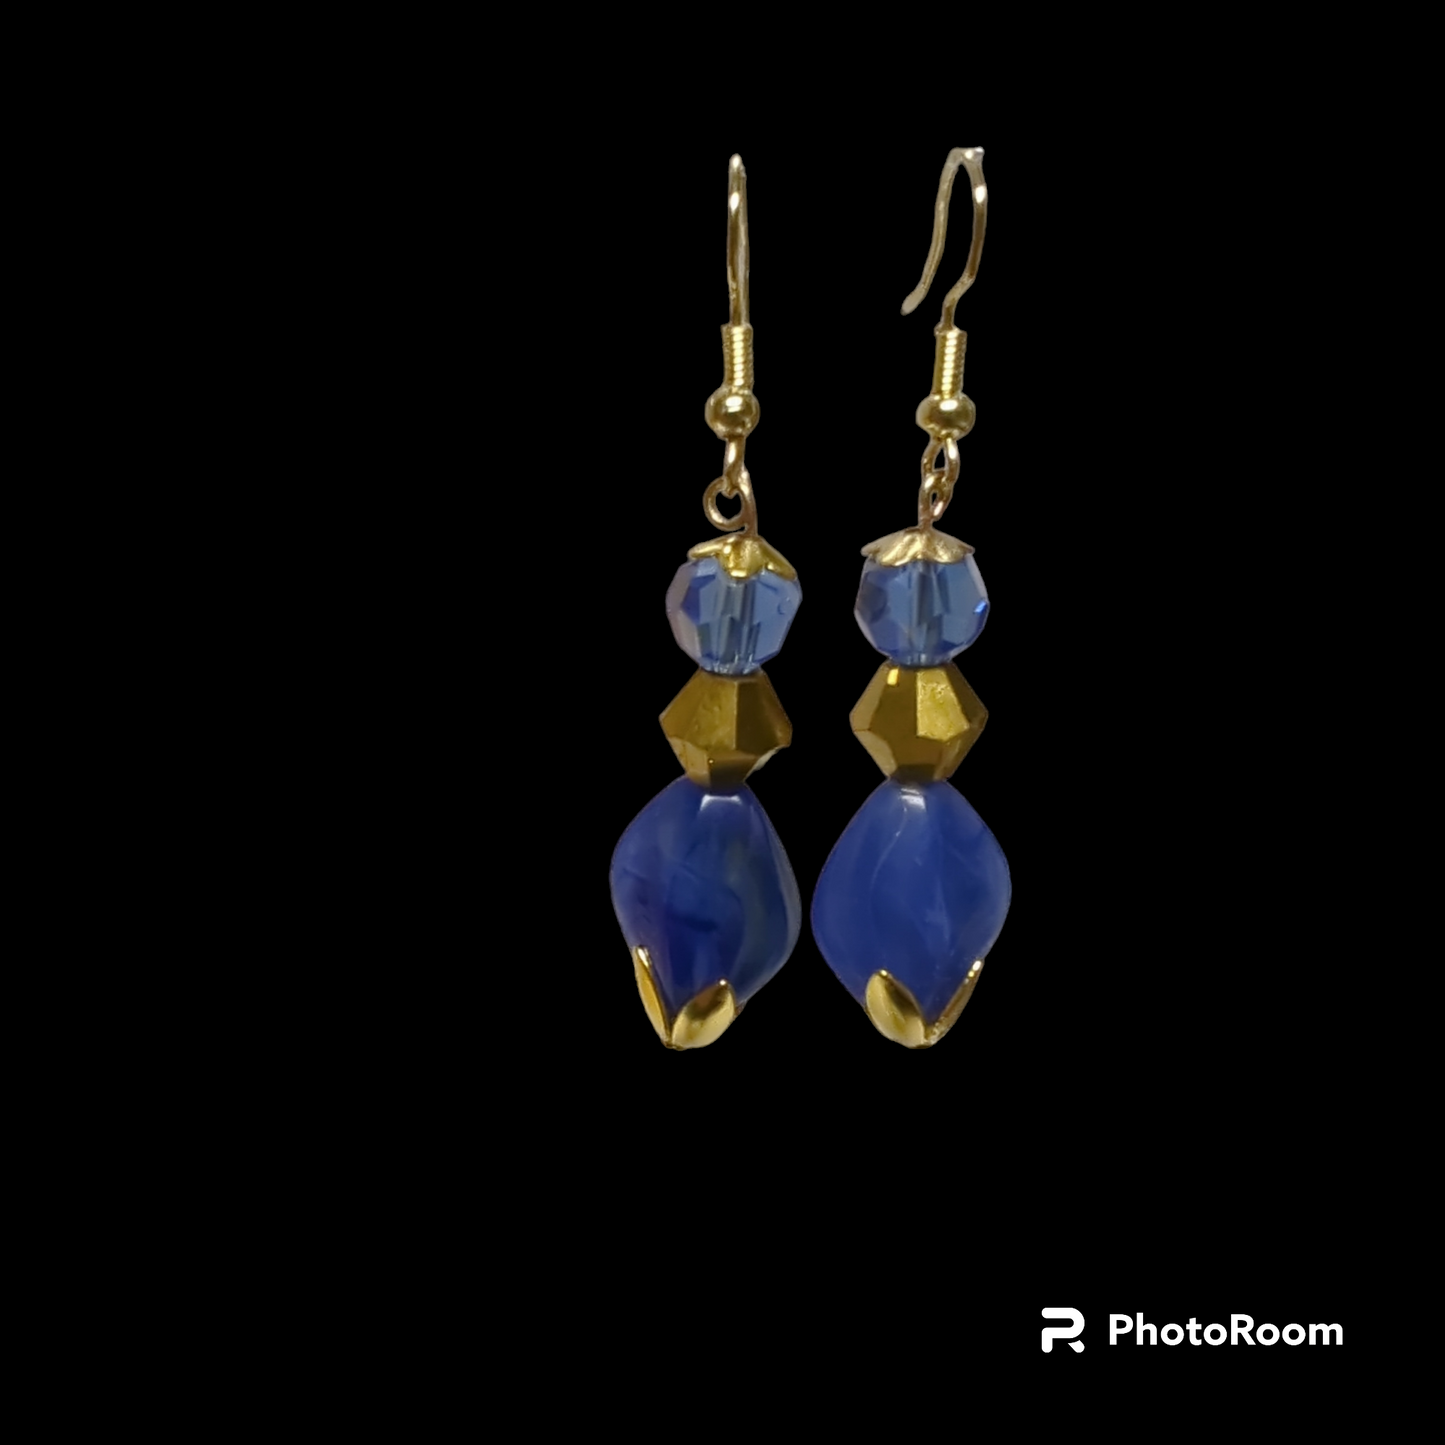 Gold and blue bead earrings.